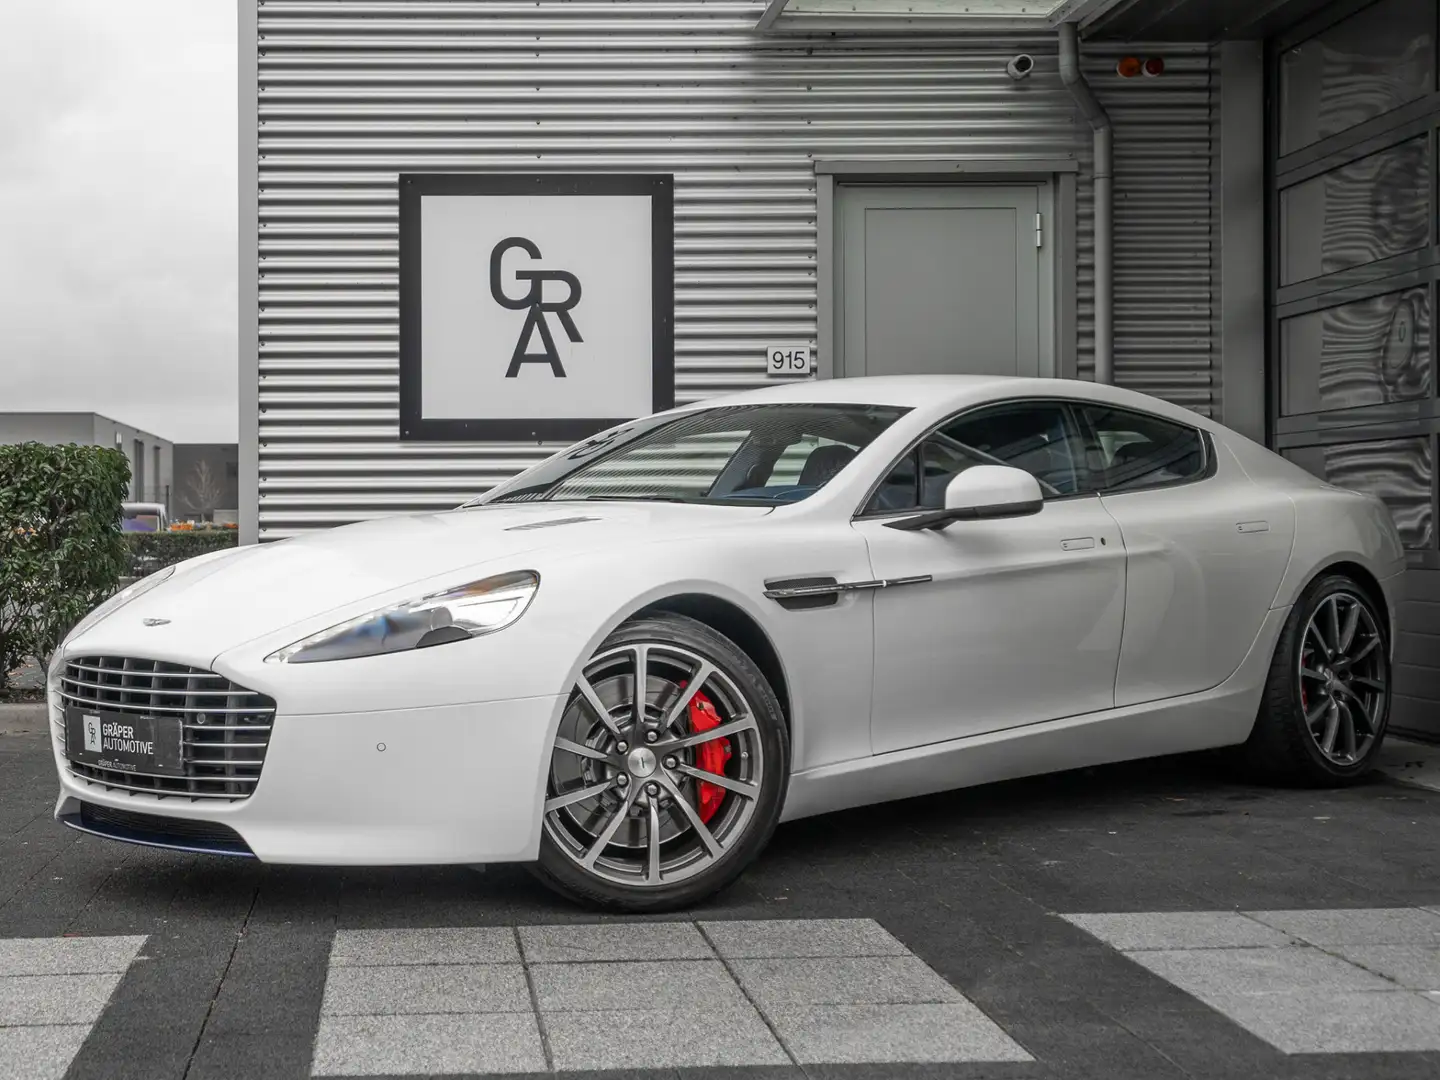 Aston Martin Rapide S 6.0 V12 ‘Britain is Great’ Edition by Q 1/8 Weiß - 2